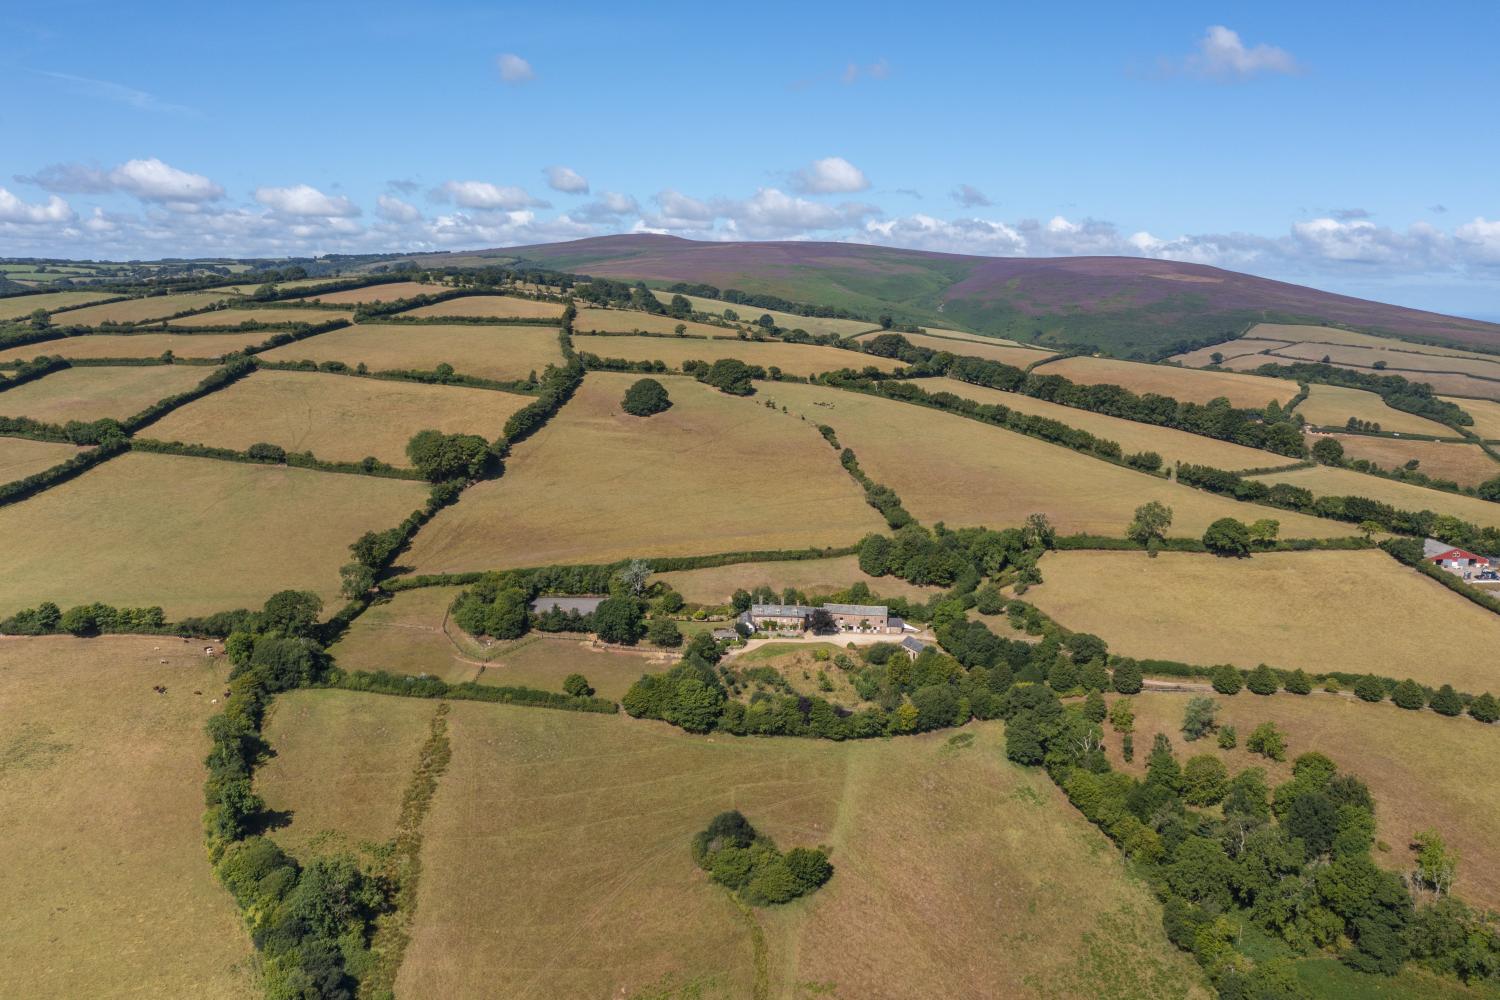 East Harwood Farm is within walking distance of Dunkery Beacon, Exmoor's highest point